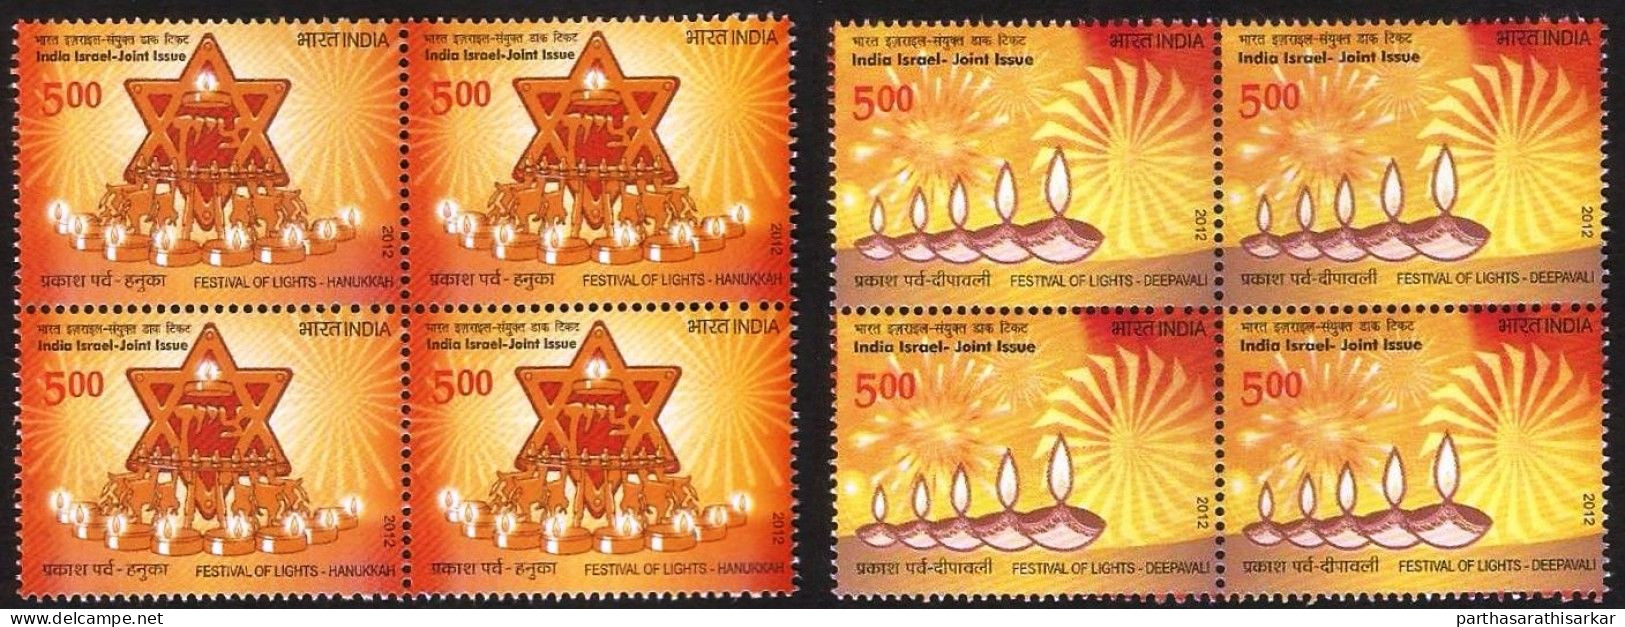 INDIA 2012 FESTIVAL OF LIGHTS JOINT ISSUE WITH ISRAEL COMPLETE SET BLOCK OF 4 MNH RARE - Ungebraucht